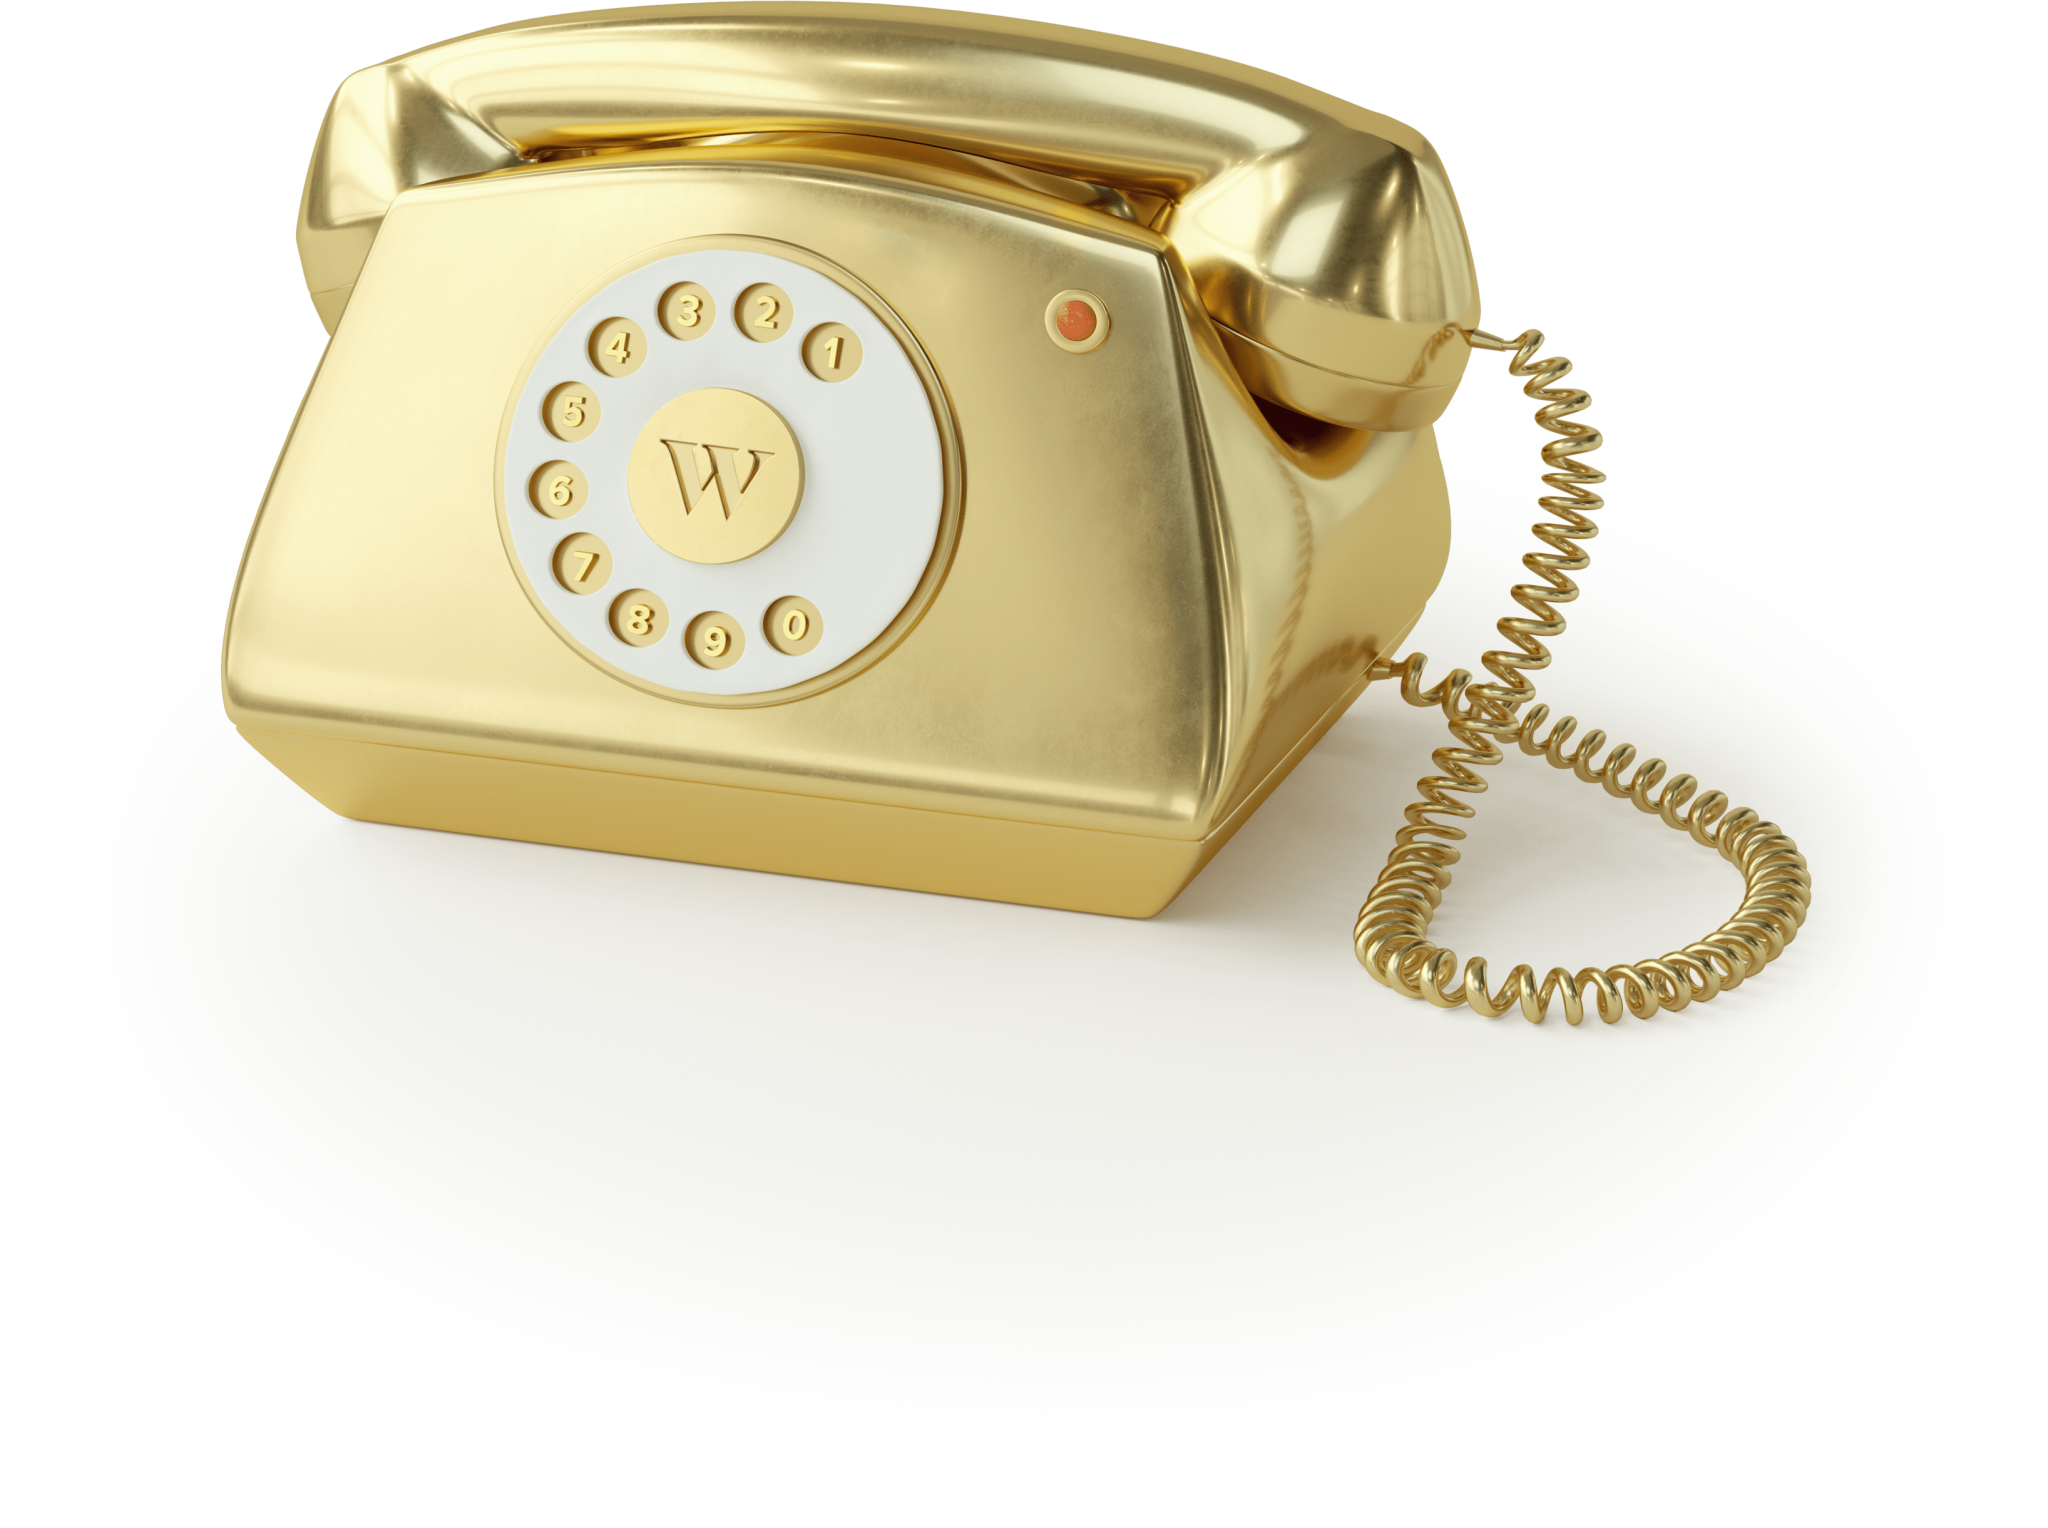 A golden rotary telephone with the Wealthsimple logo in the centre